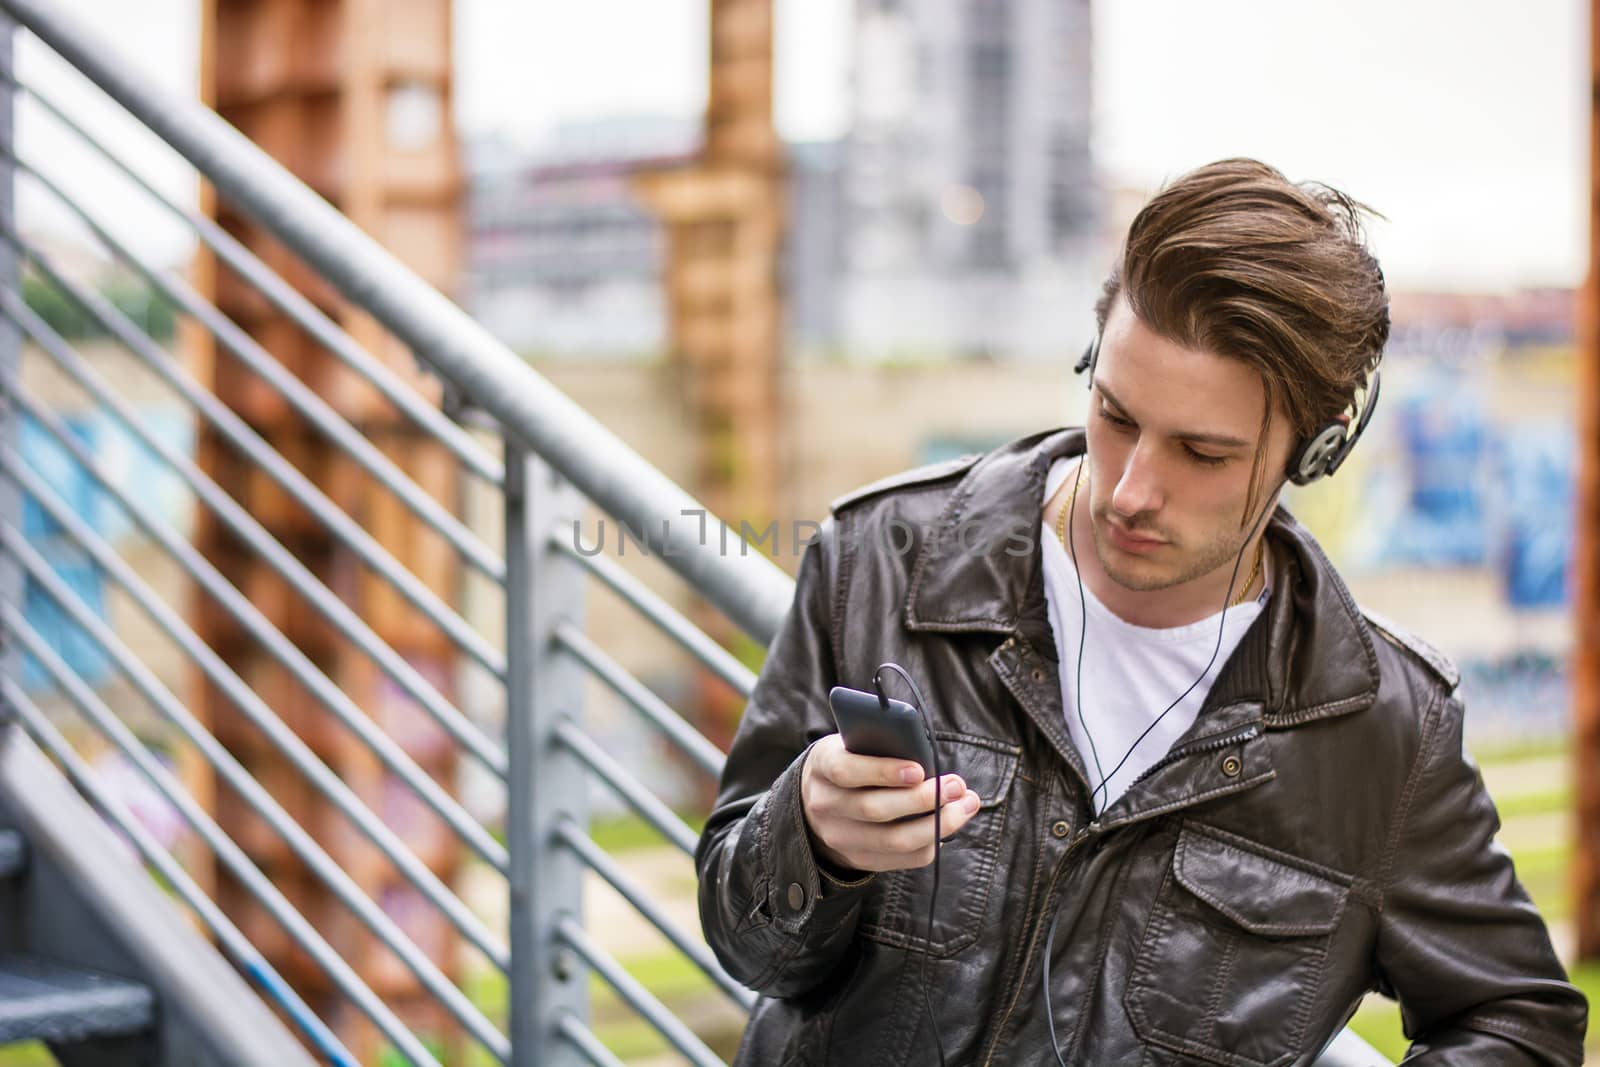 Handsome young man standing outdoors in urban environment on metal stairs, using cell phone